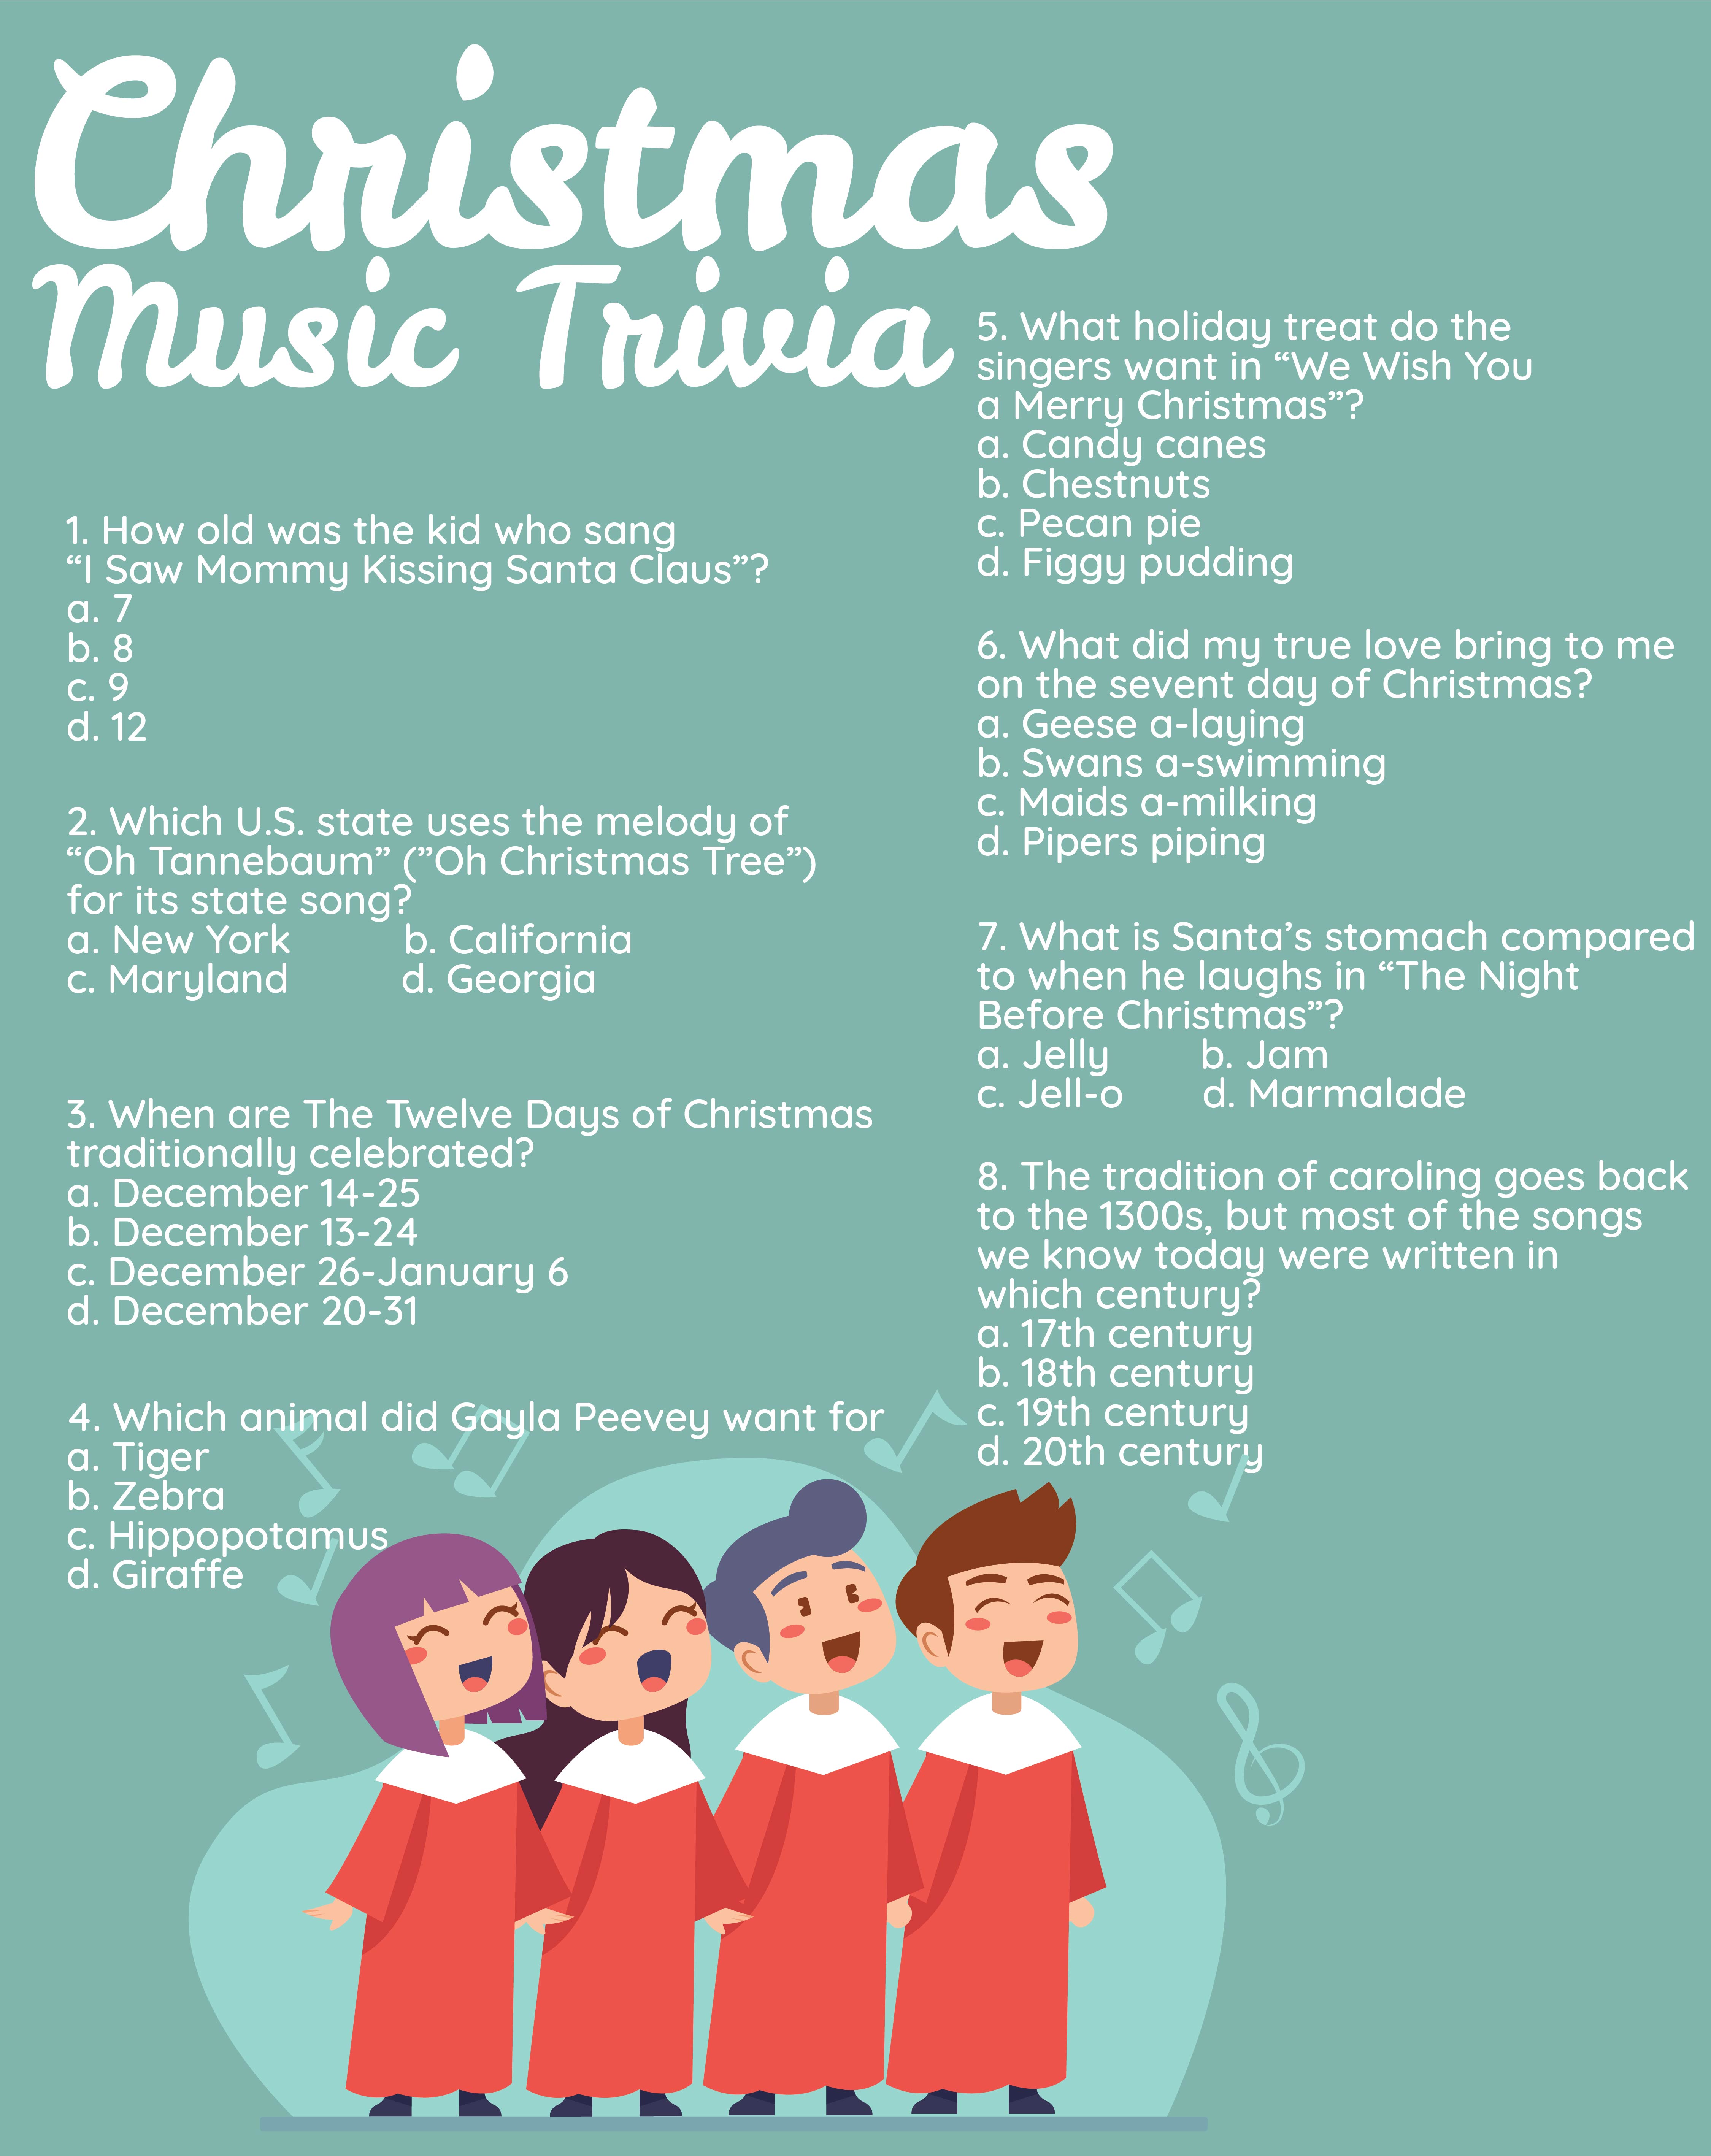 Christmas Music Trivia Questions and Answers